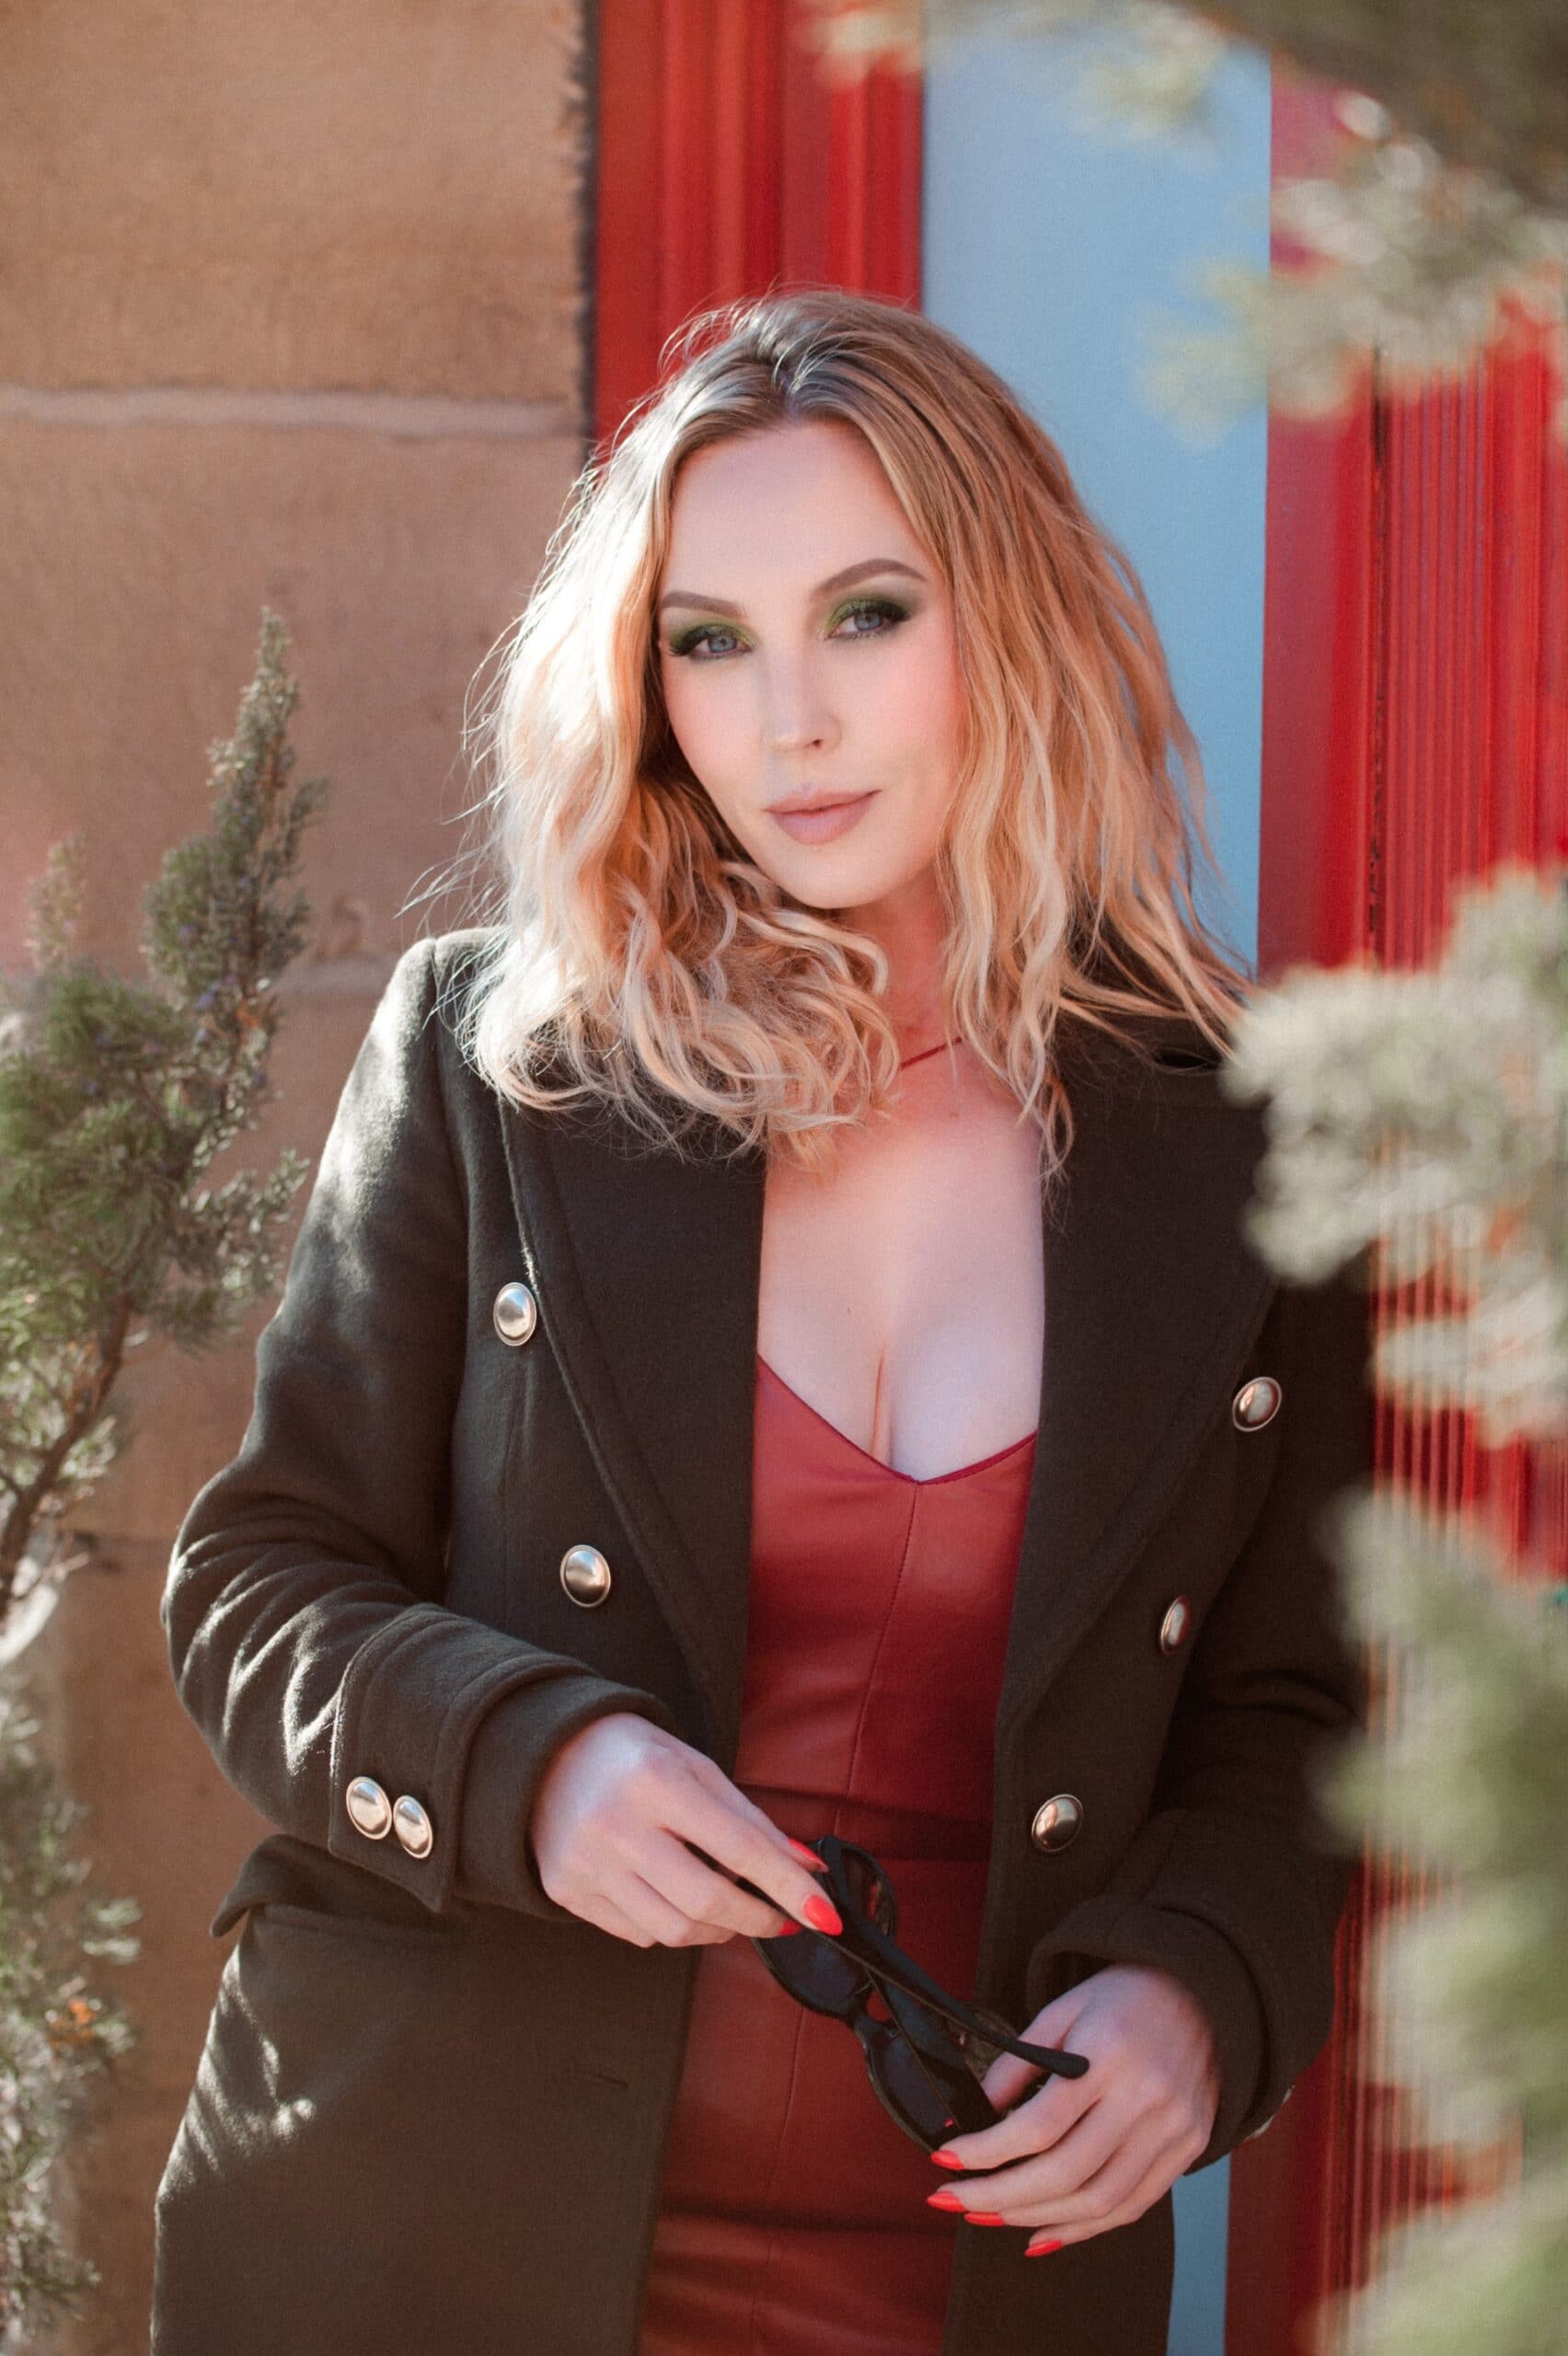 boudoir photographer steff posed in red leather dress and brown leather motorcycle jacket. celebrating yourself.